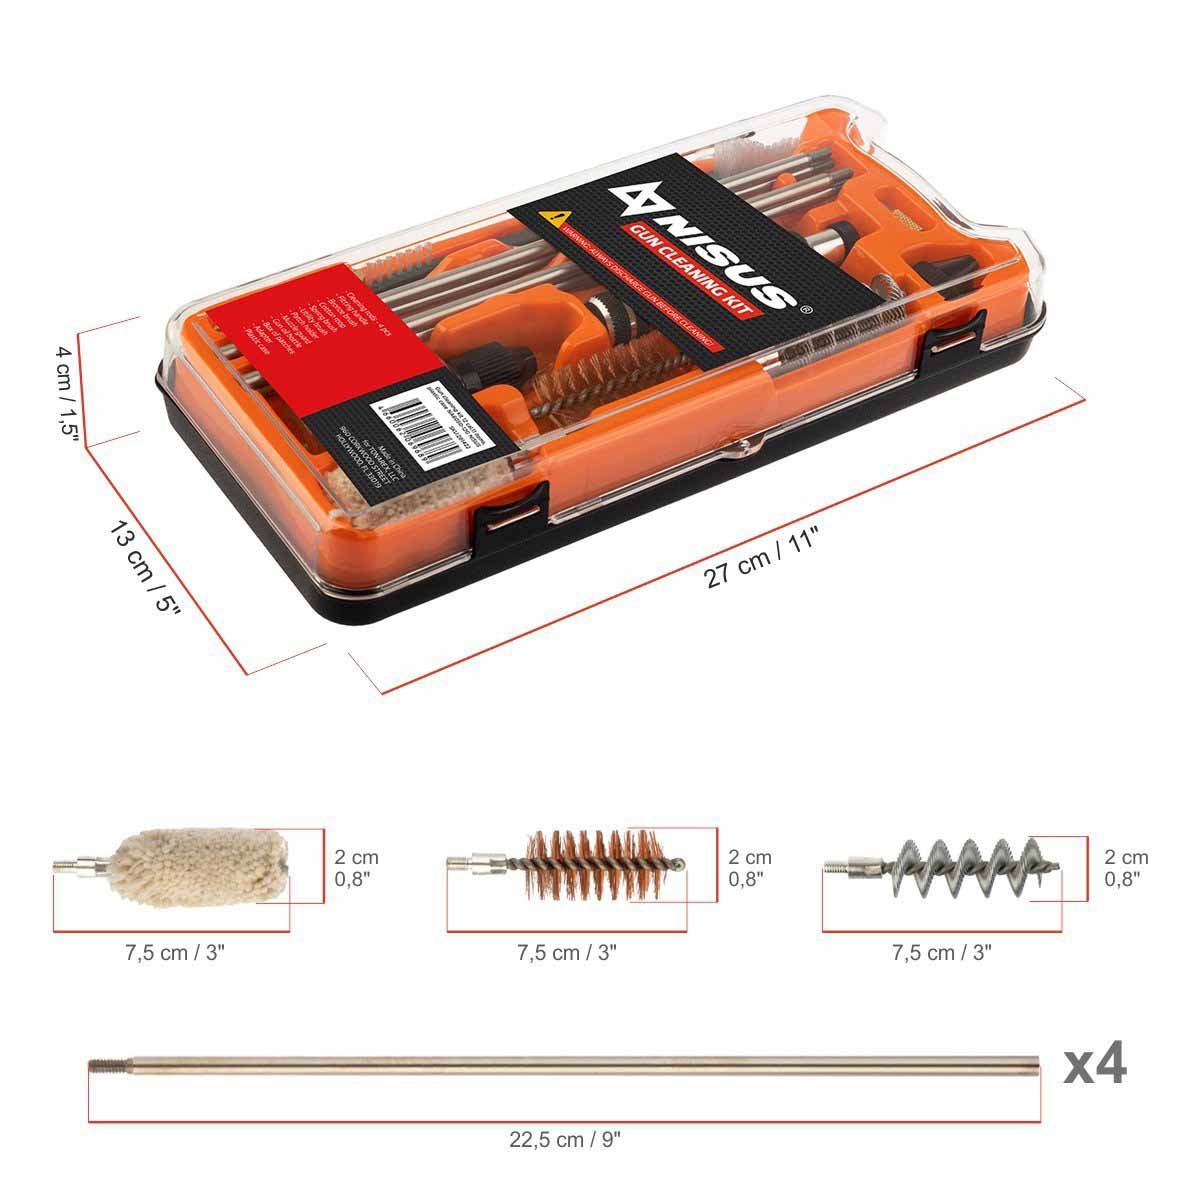 Gun Cleaning Kit, 12 Caliber, 11 Items, Plastic Case is 11 inches long, 5 inches wide, 1.5 inches high